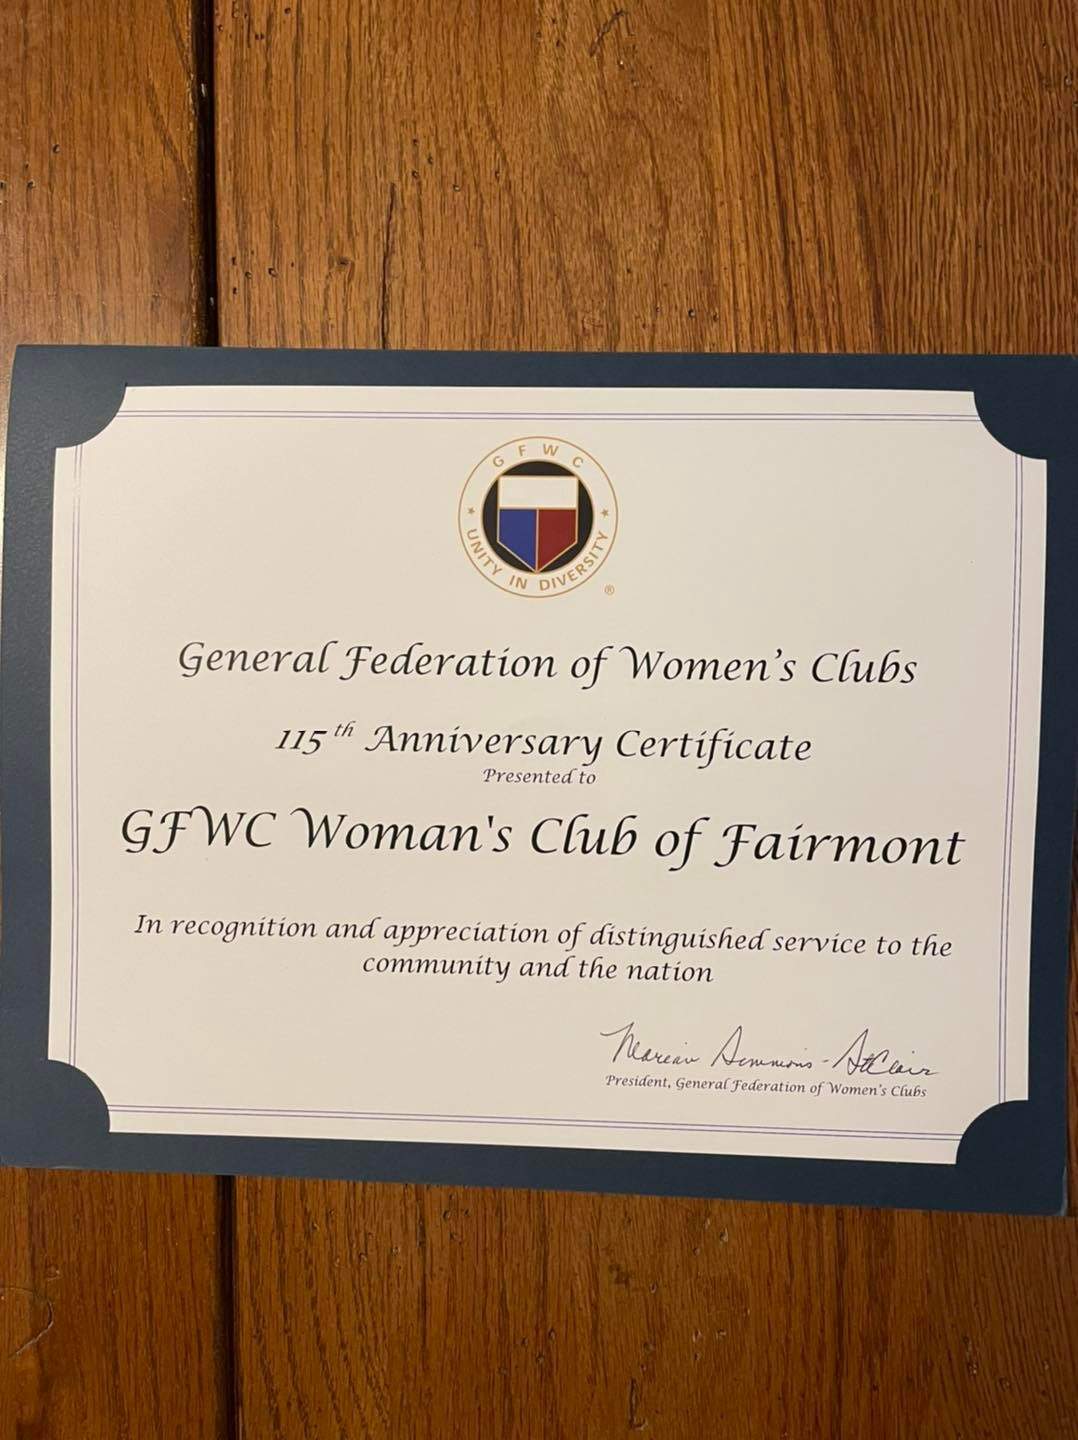 Our club received a certificate for volunteering as a club for 115 years!